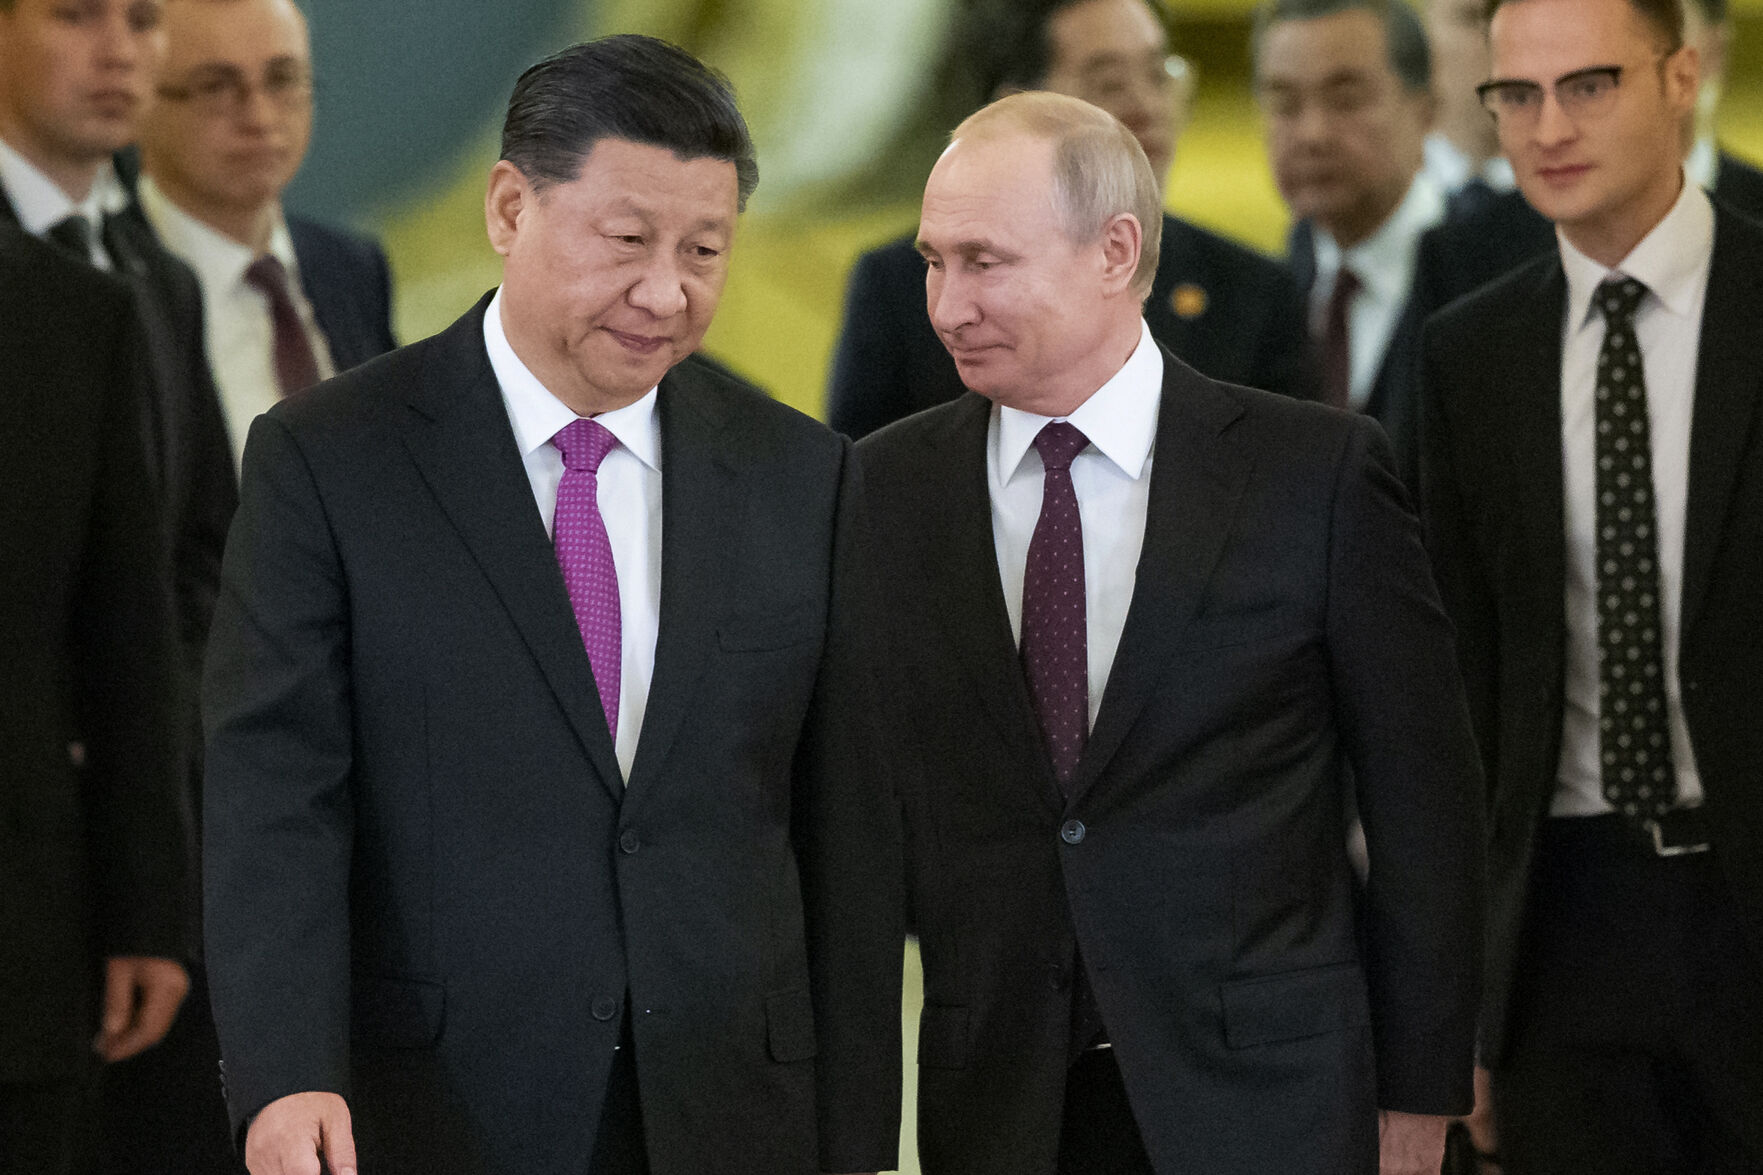 <p>FILE - Chinese President Xi Jinping, left, and Russian President Vladimir Putin enter a hall for talks in the Kremlin in Moscow, Russia, June 5, 2019. The Chinese government said Xi would visit Moscow from March 20, to March 22, 2023, but gave no indication when he departed. The Russian government said Xi was due to arrive at midday and meet later with Putin.(AP Photo/Alexander Zemlianichenko, Pool, File)</p>   PHOTO CREDIT: Alexander Zemlianichenko